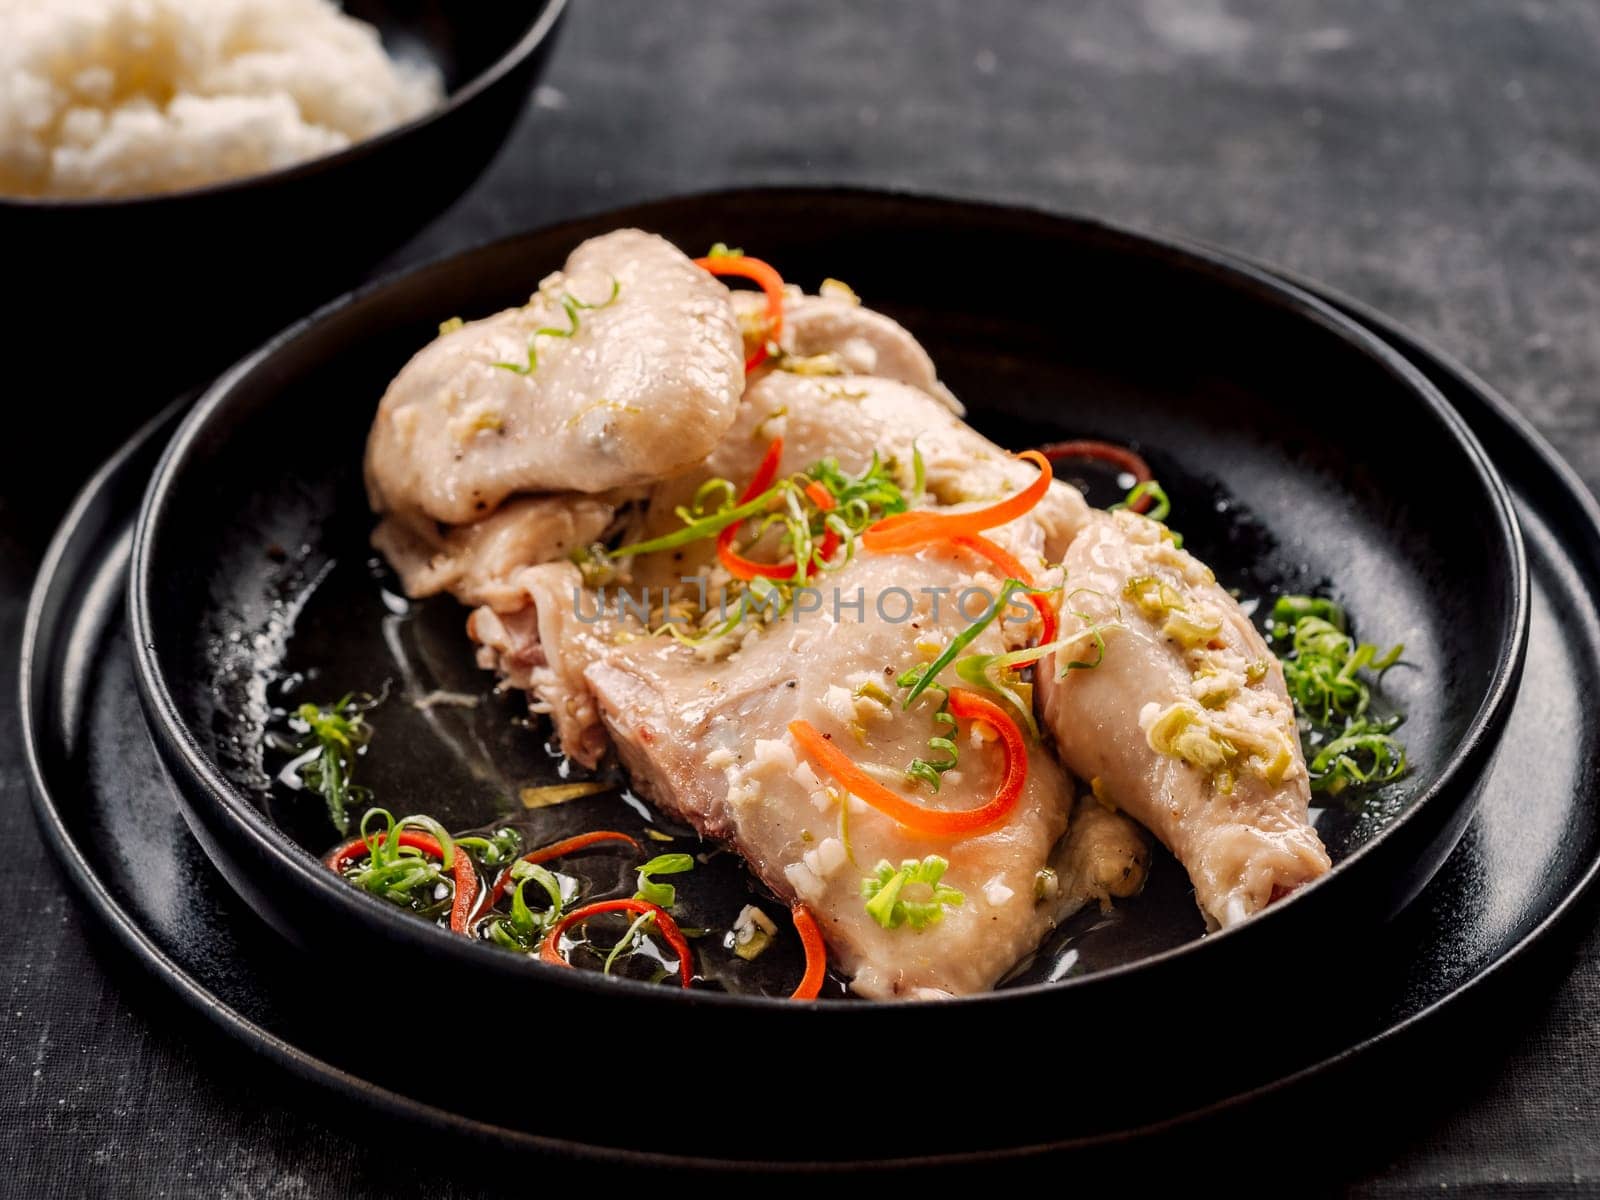 Sous Vide Chicken with spices on plate by fascinadora